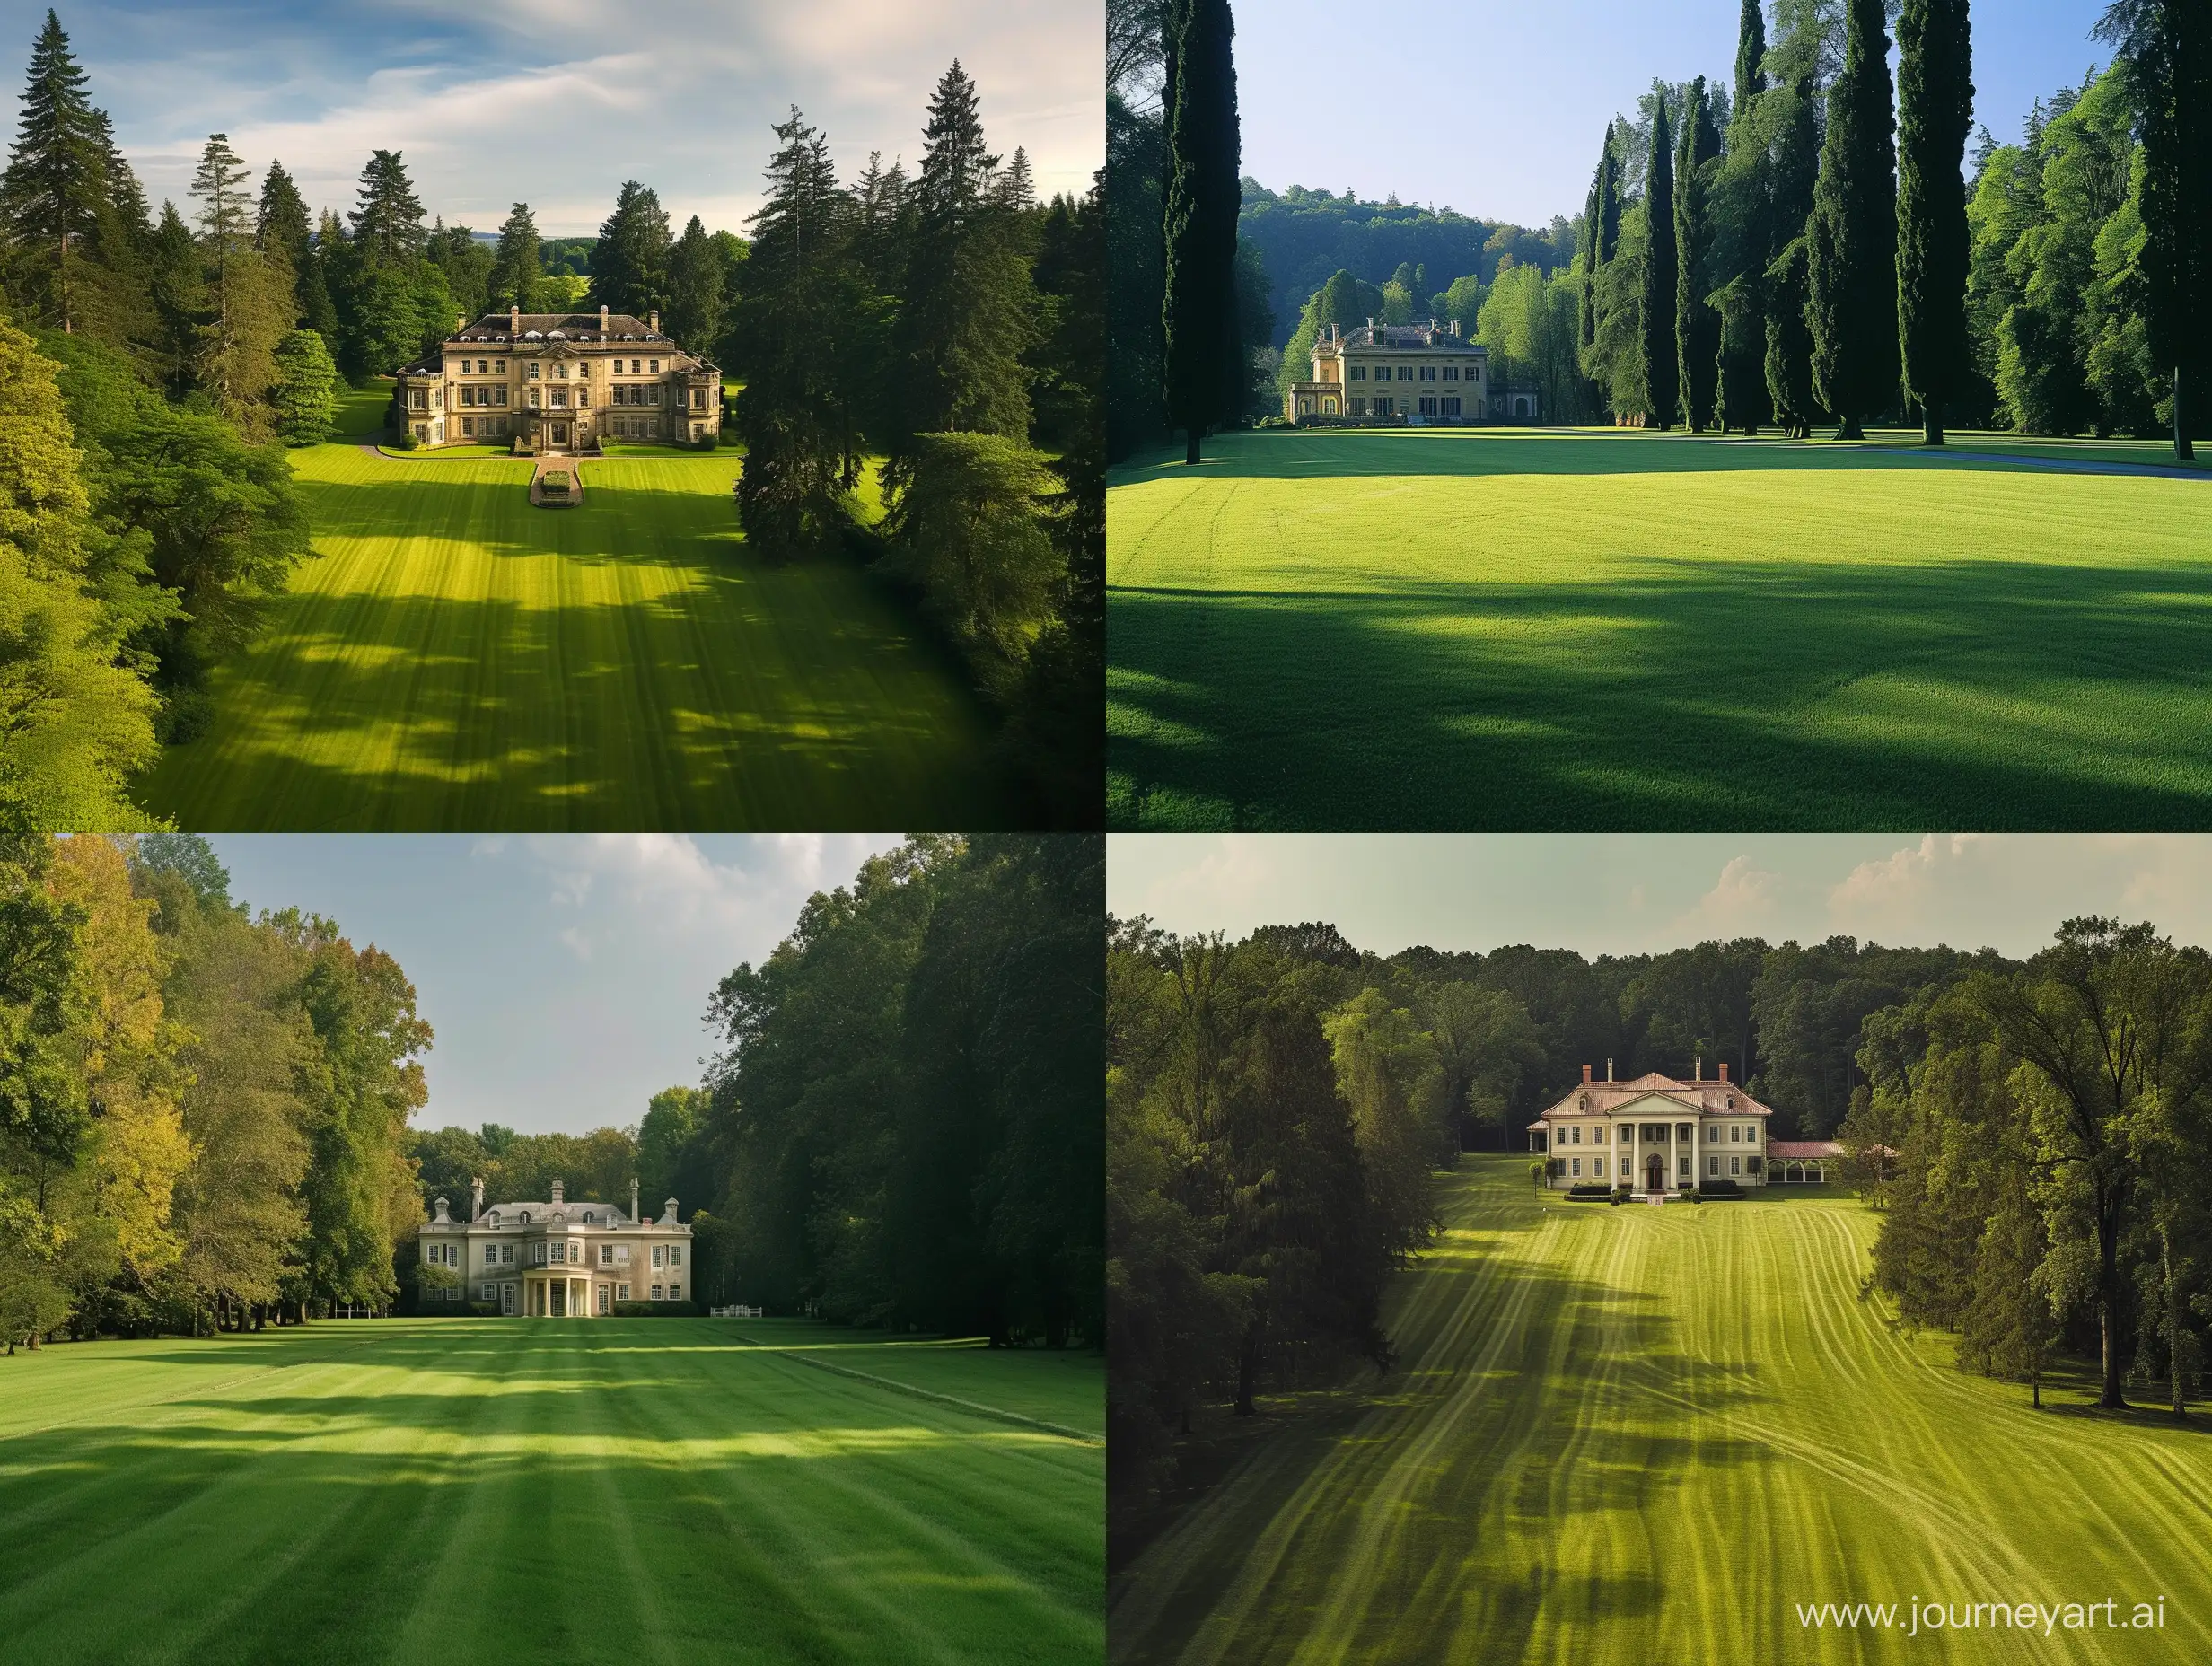 mansion

that is surrounded by 1000 acres of perfectly manicured grass.
tall trees line every inch of the edge of the estate and ari

there is only one road leading in and out of that place.
